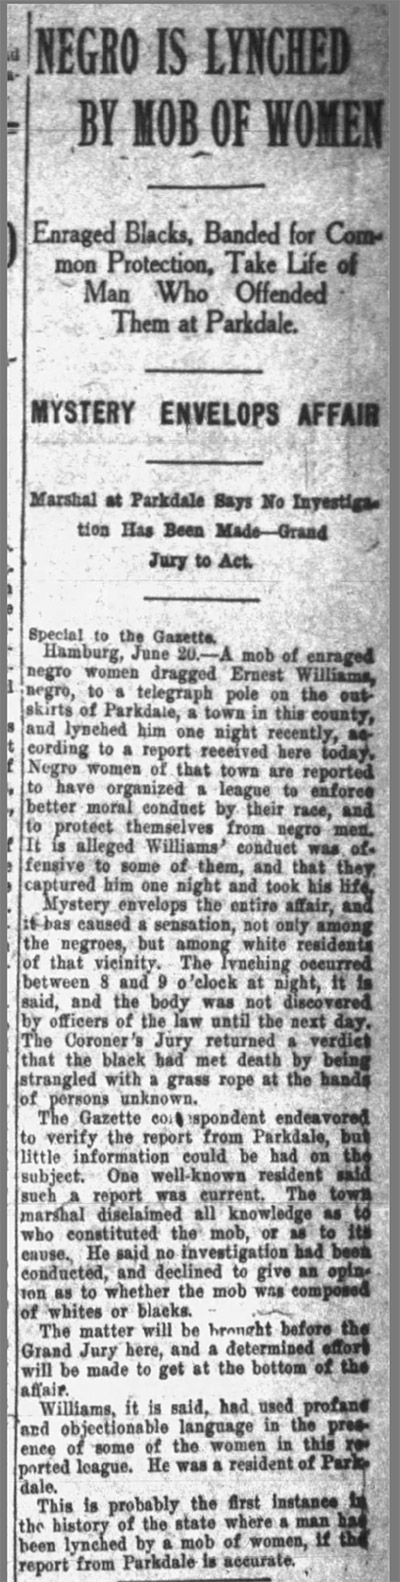 "Negro is lynched by mob of women" newspaper clipping